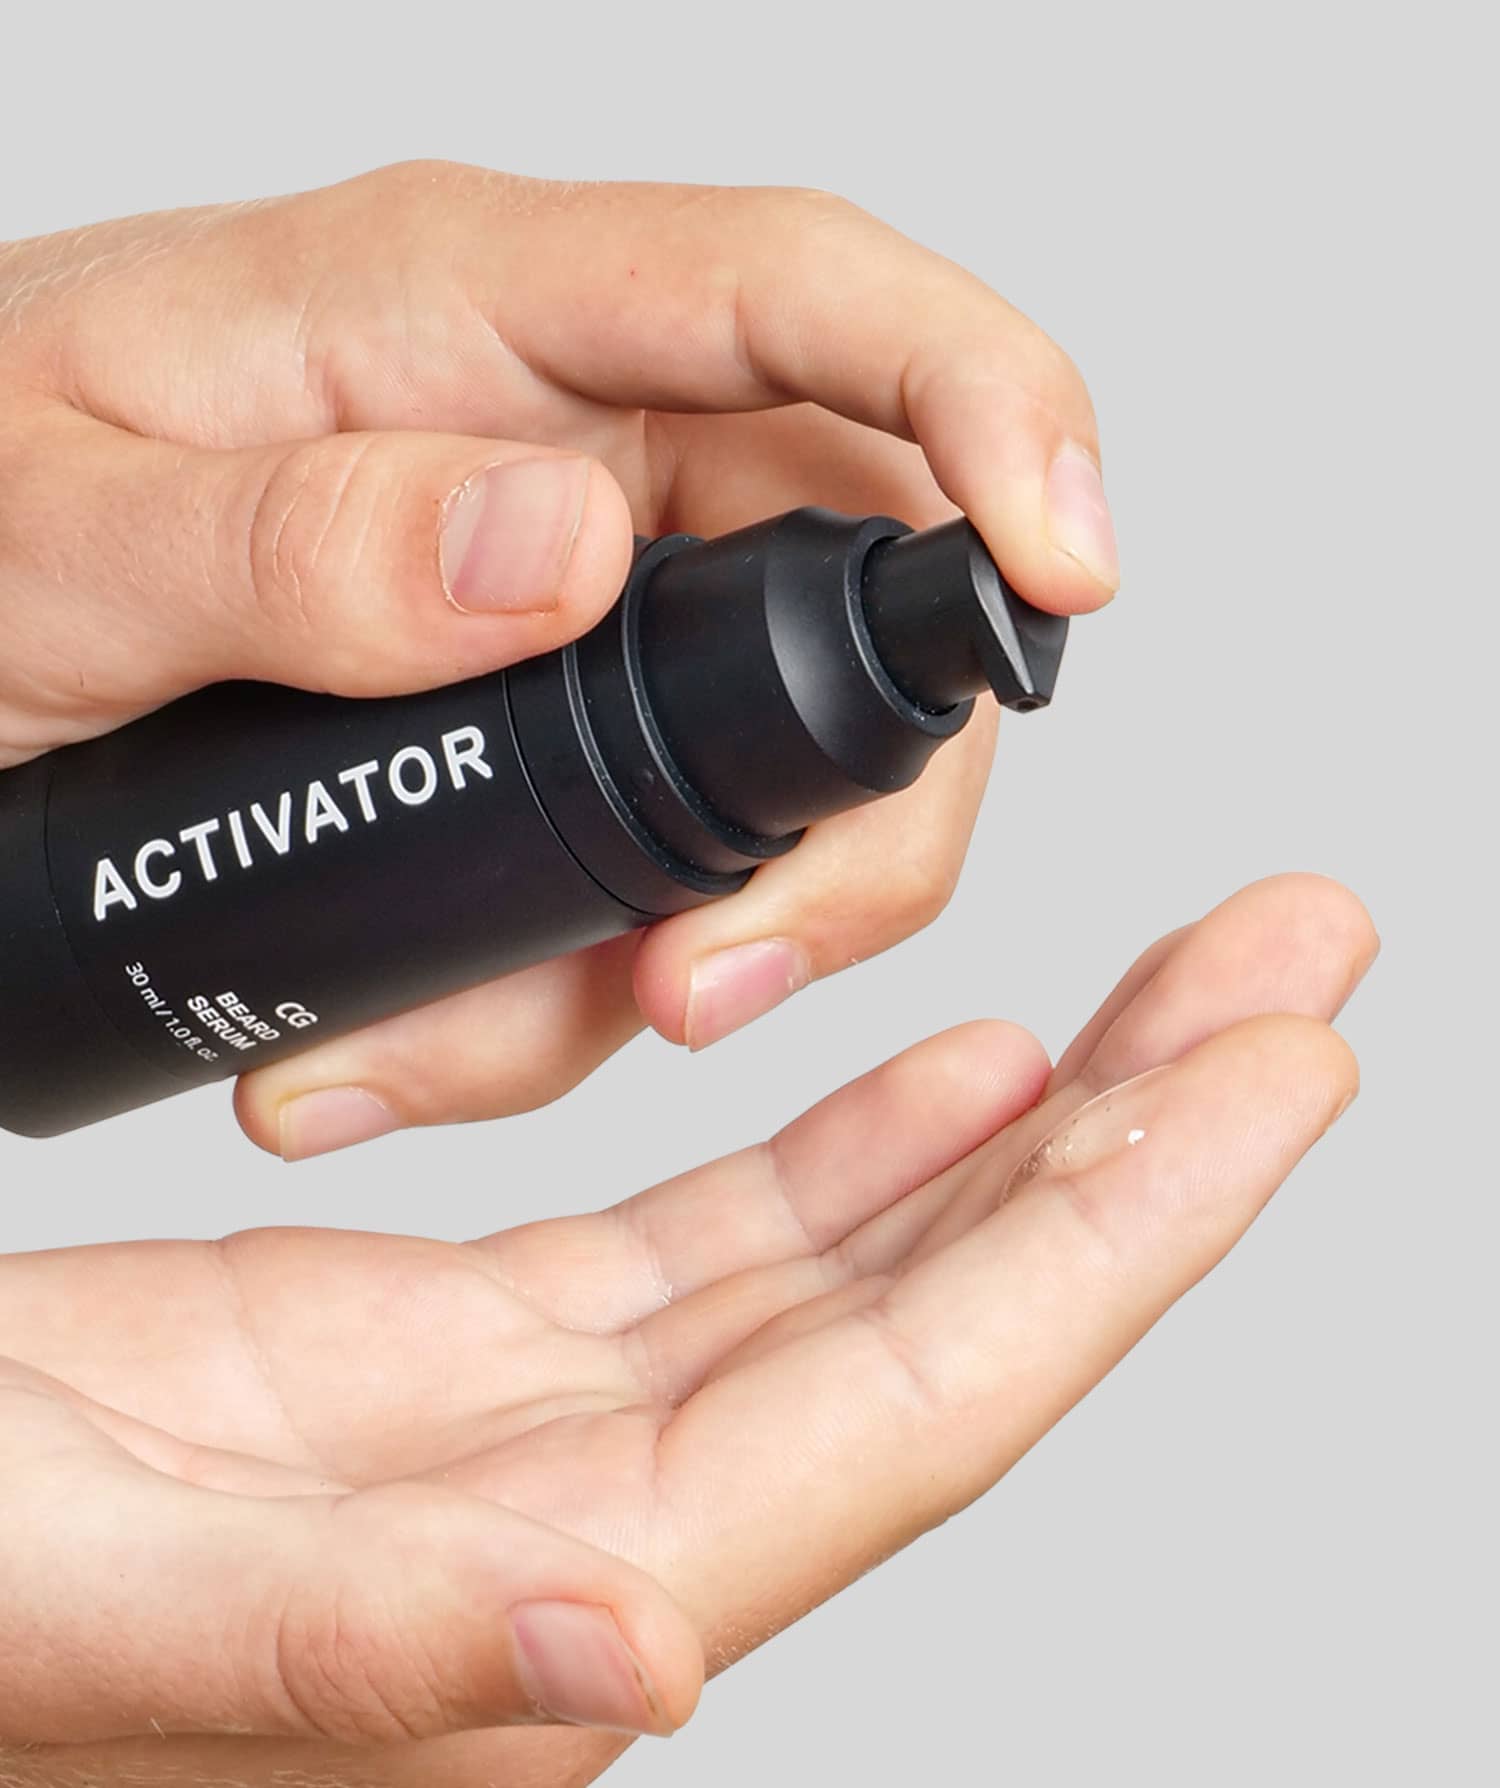 The Activator